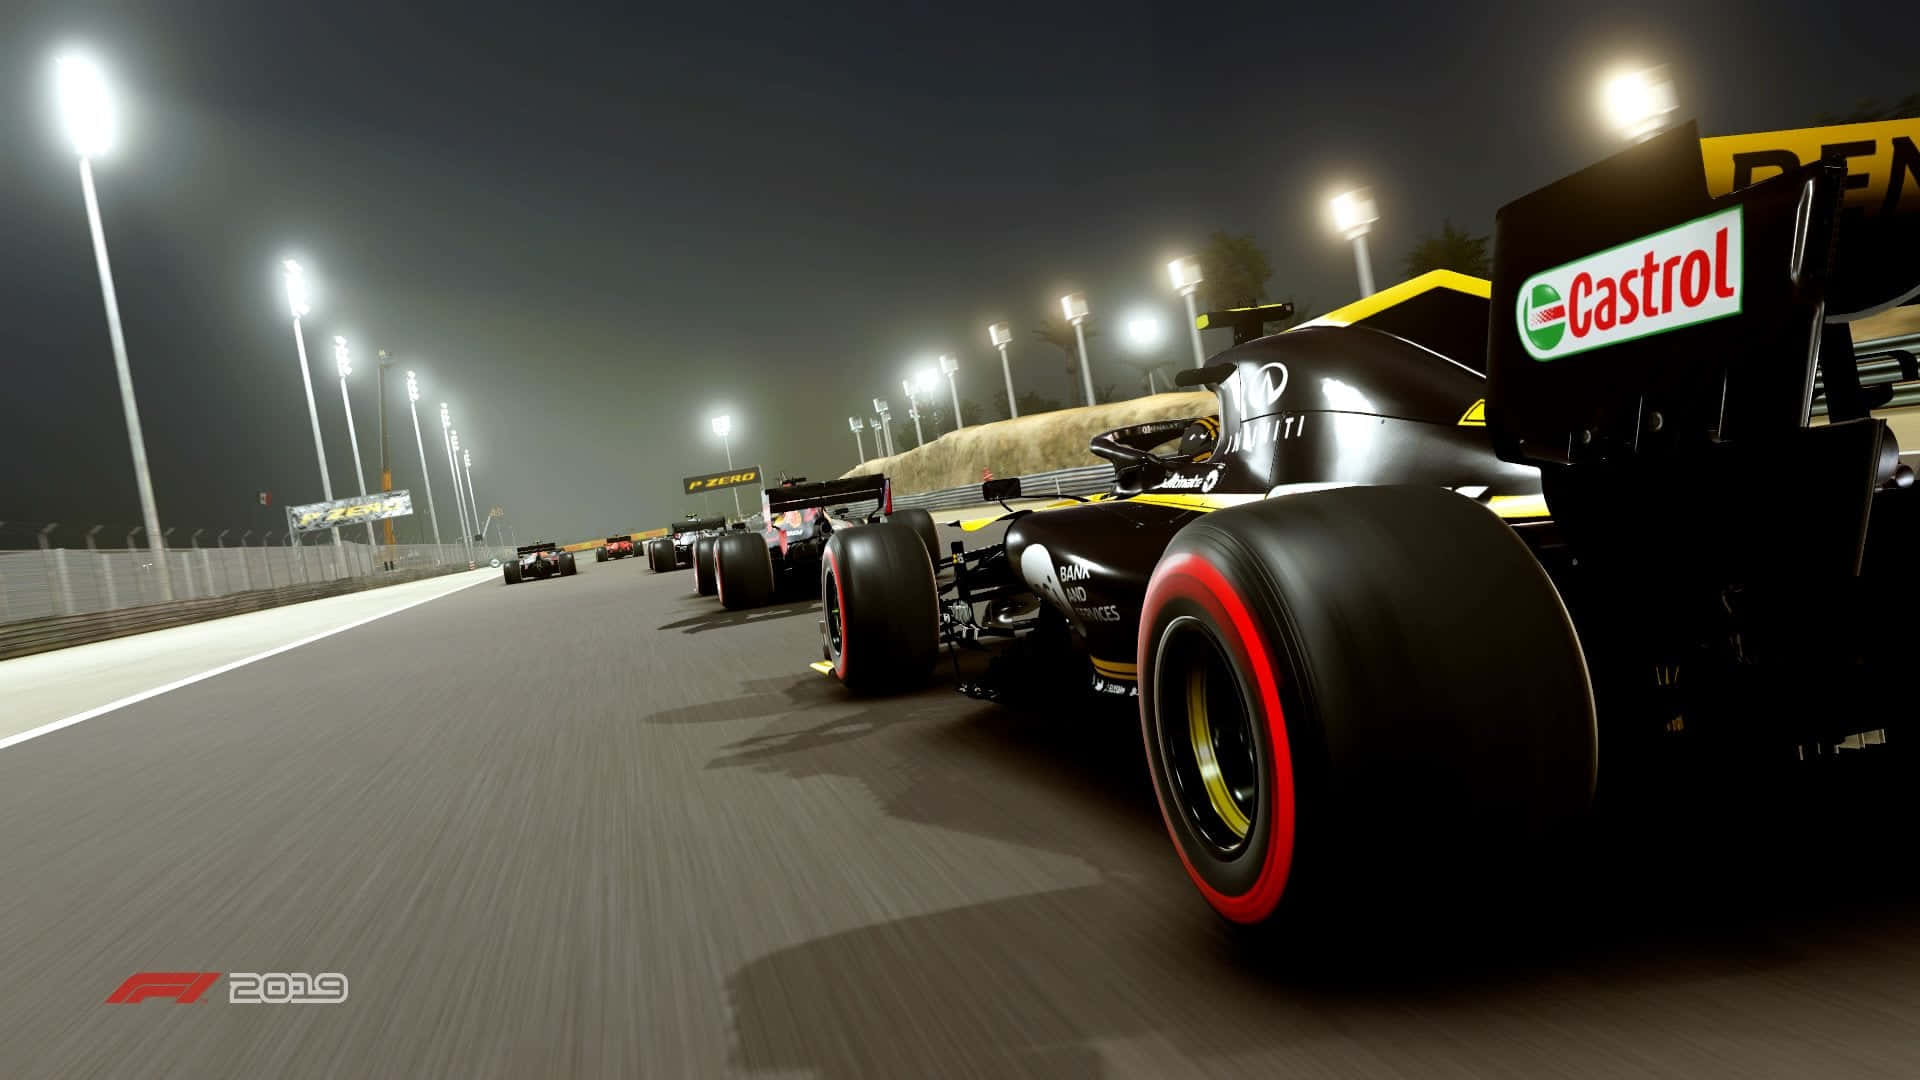 A Race Car Driving Down A Track At Night